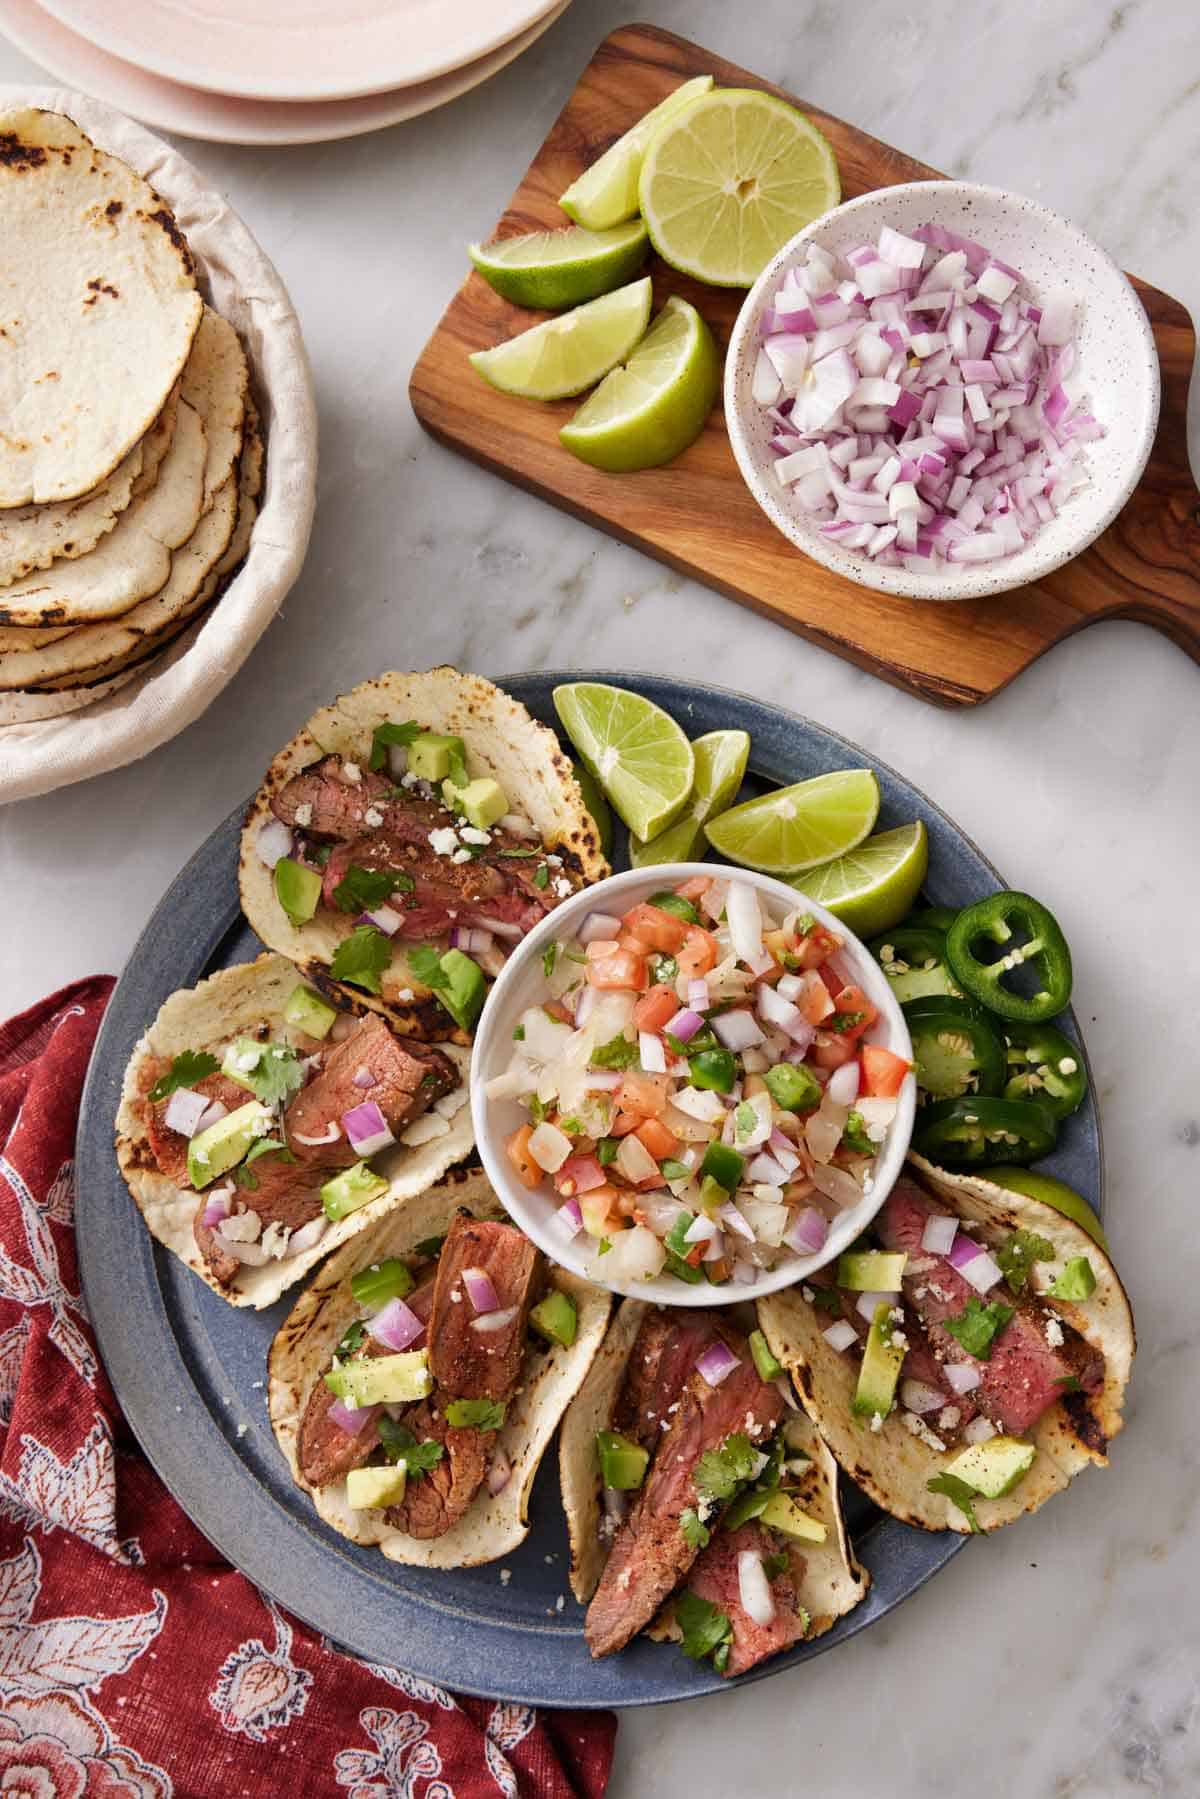 Overhead view of a platter of steak tacos along with a bowl of salsa, lime wedges, and jalapeno slices. A board with more toppings and bowl of tortilla to the side.